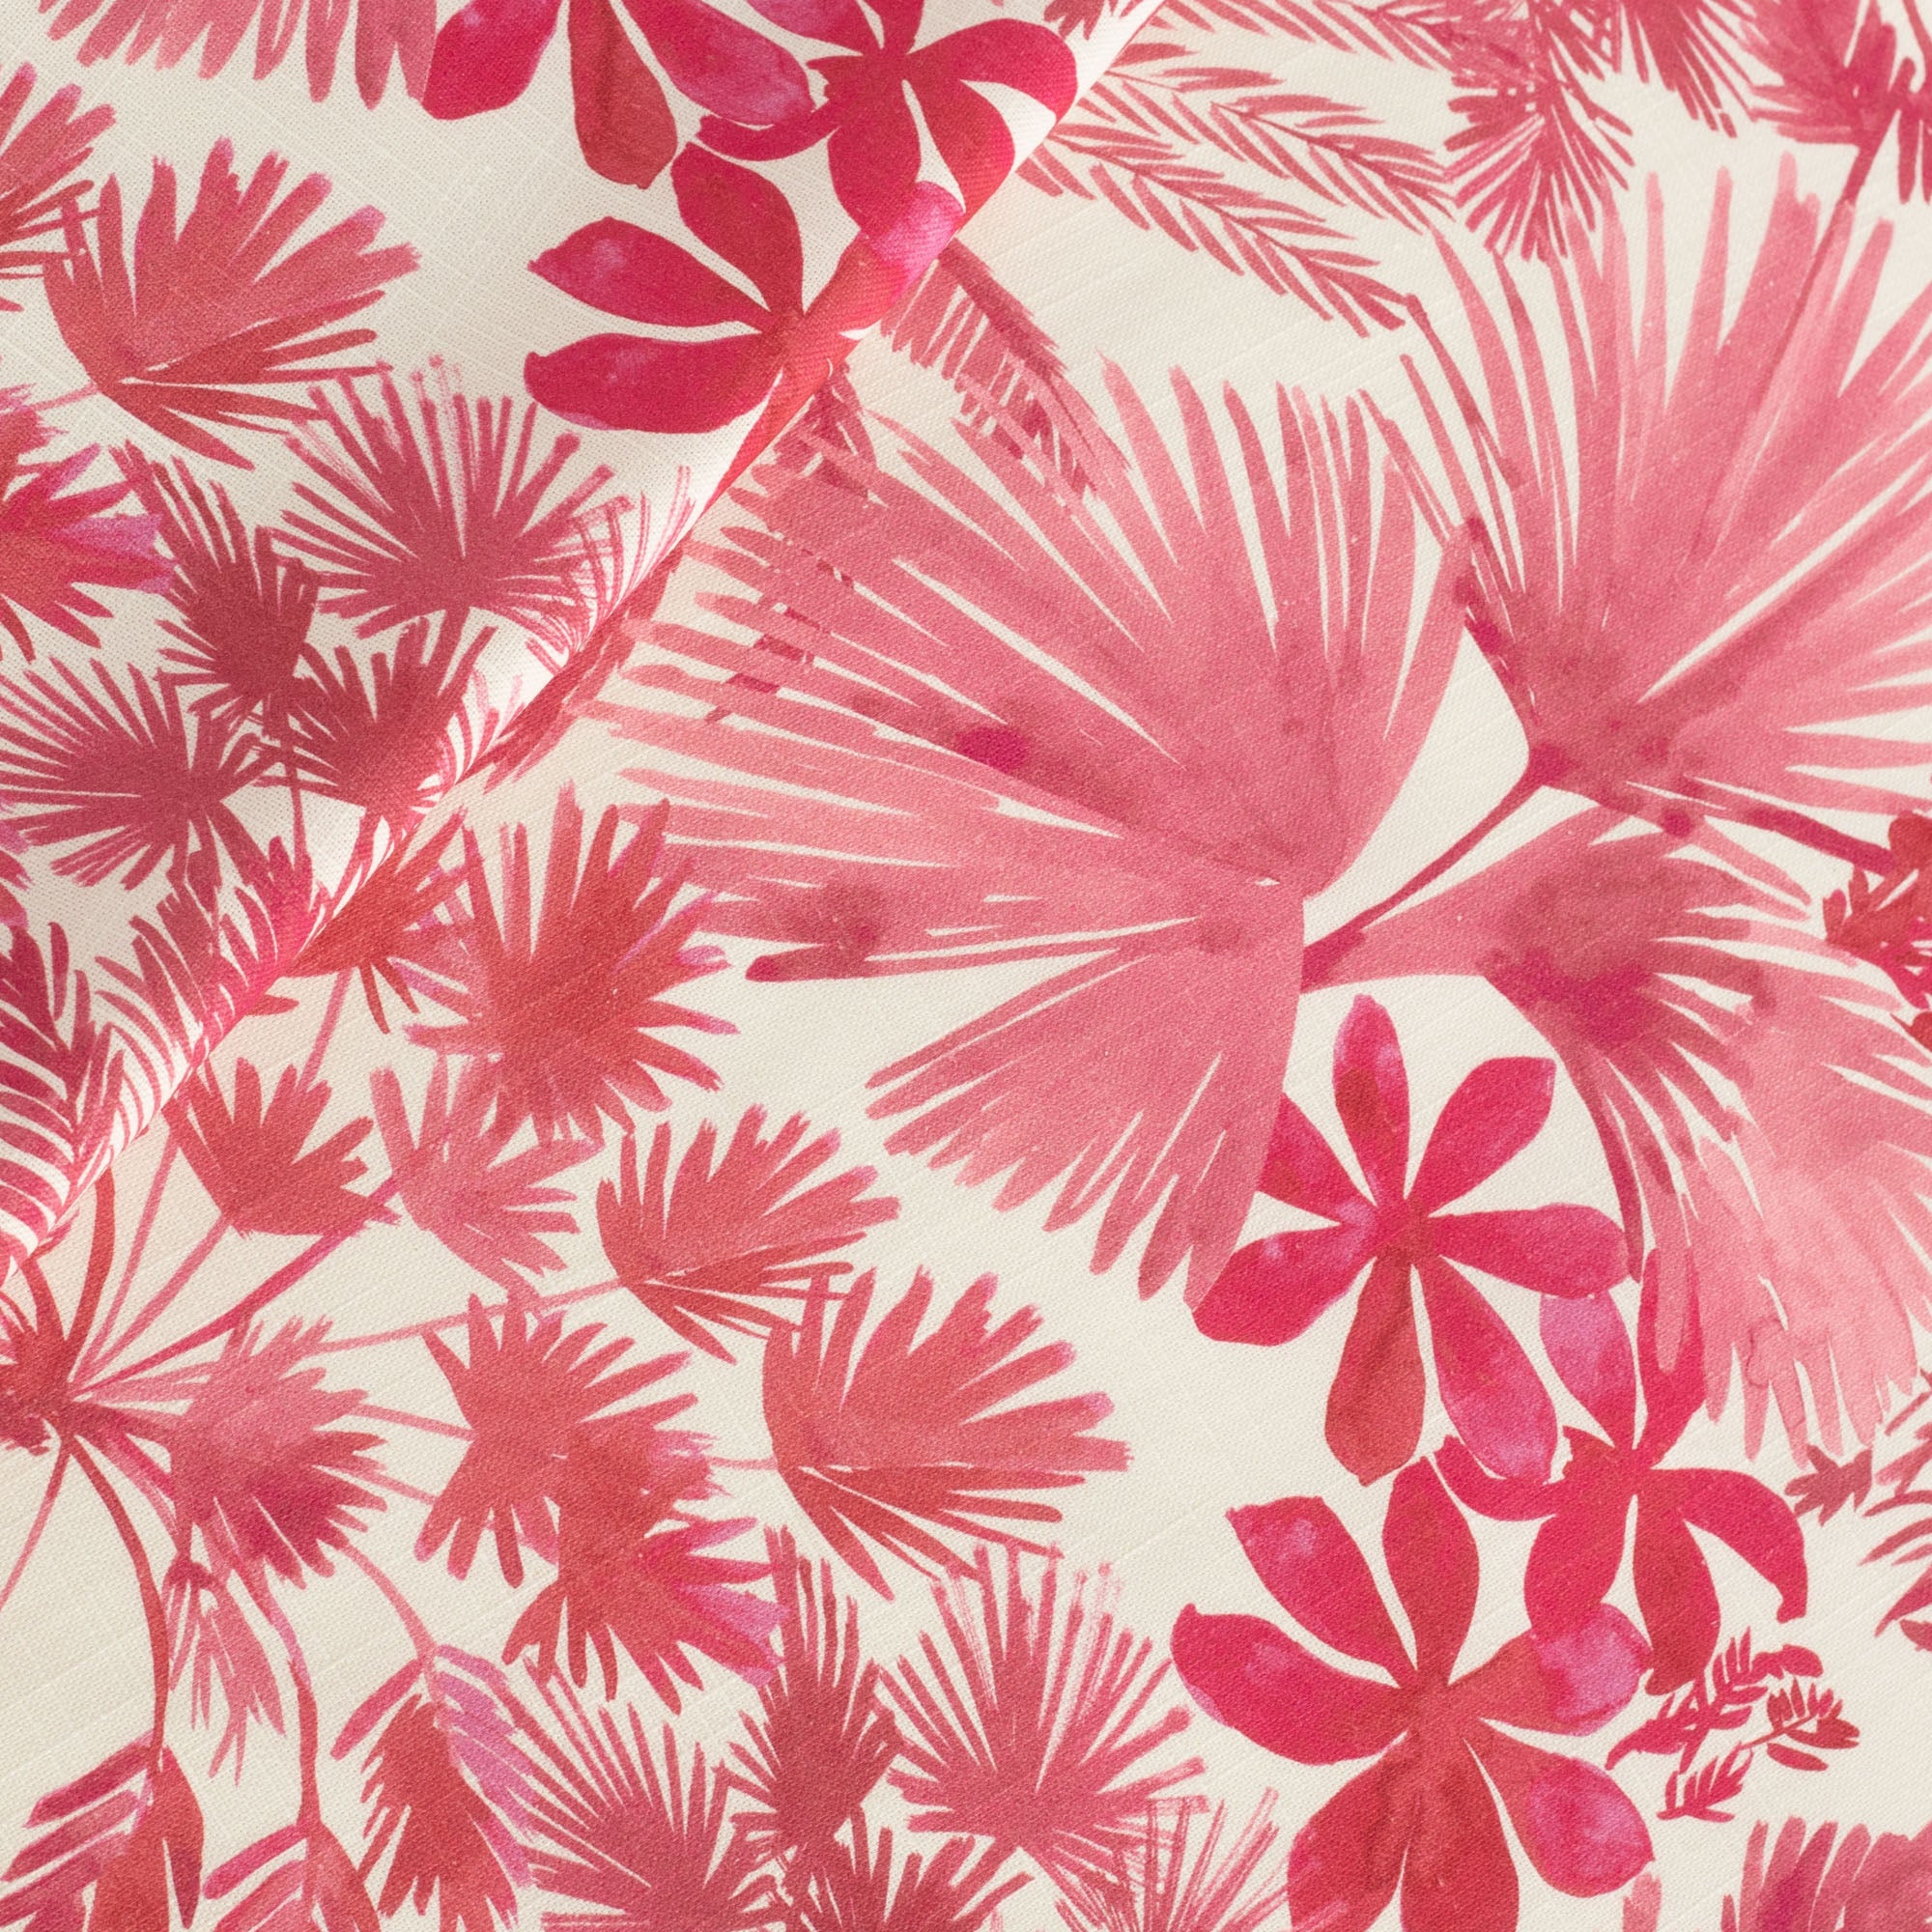 Daintree Hot Orchid painterly pink leafy print cotton fabric from Tonic Living